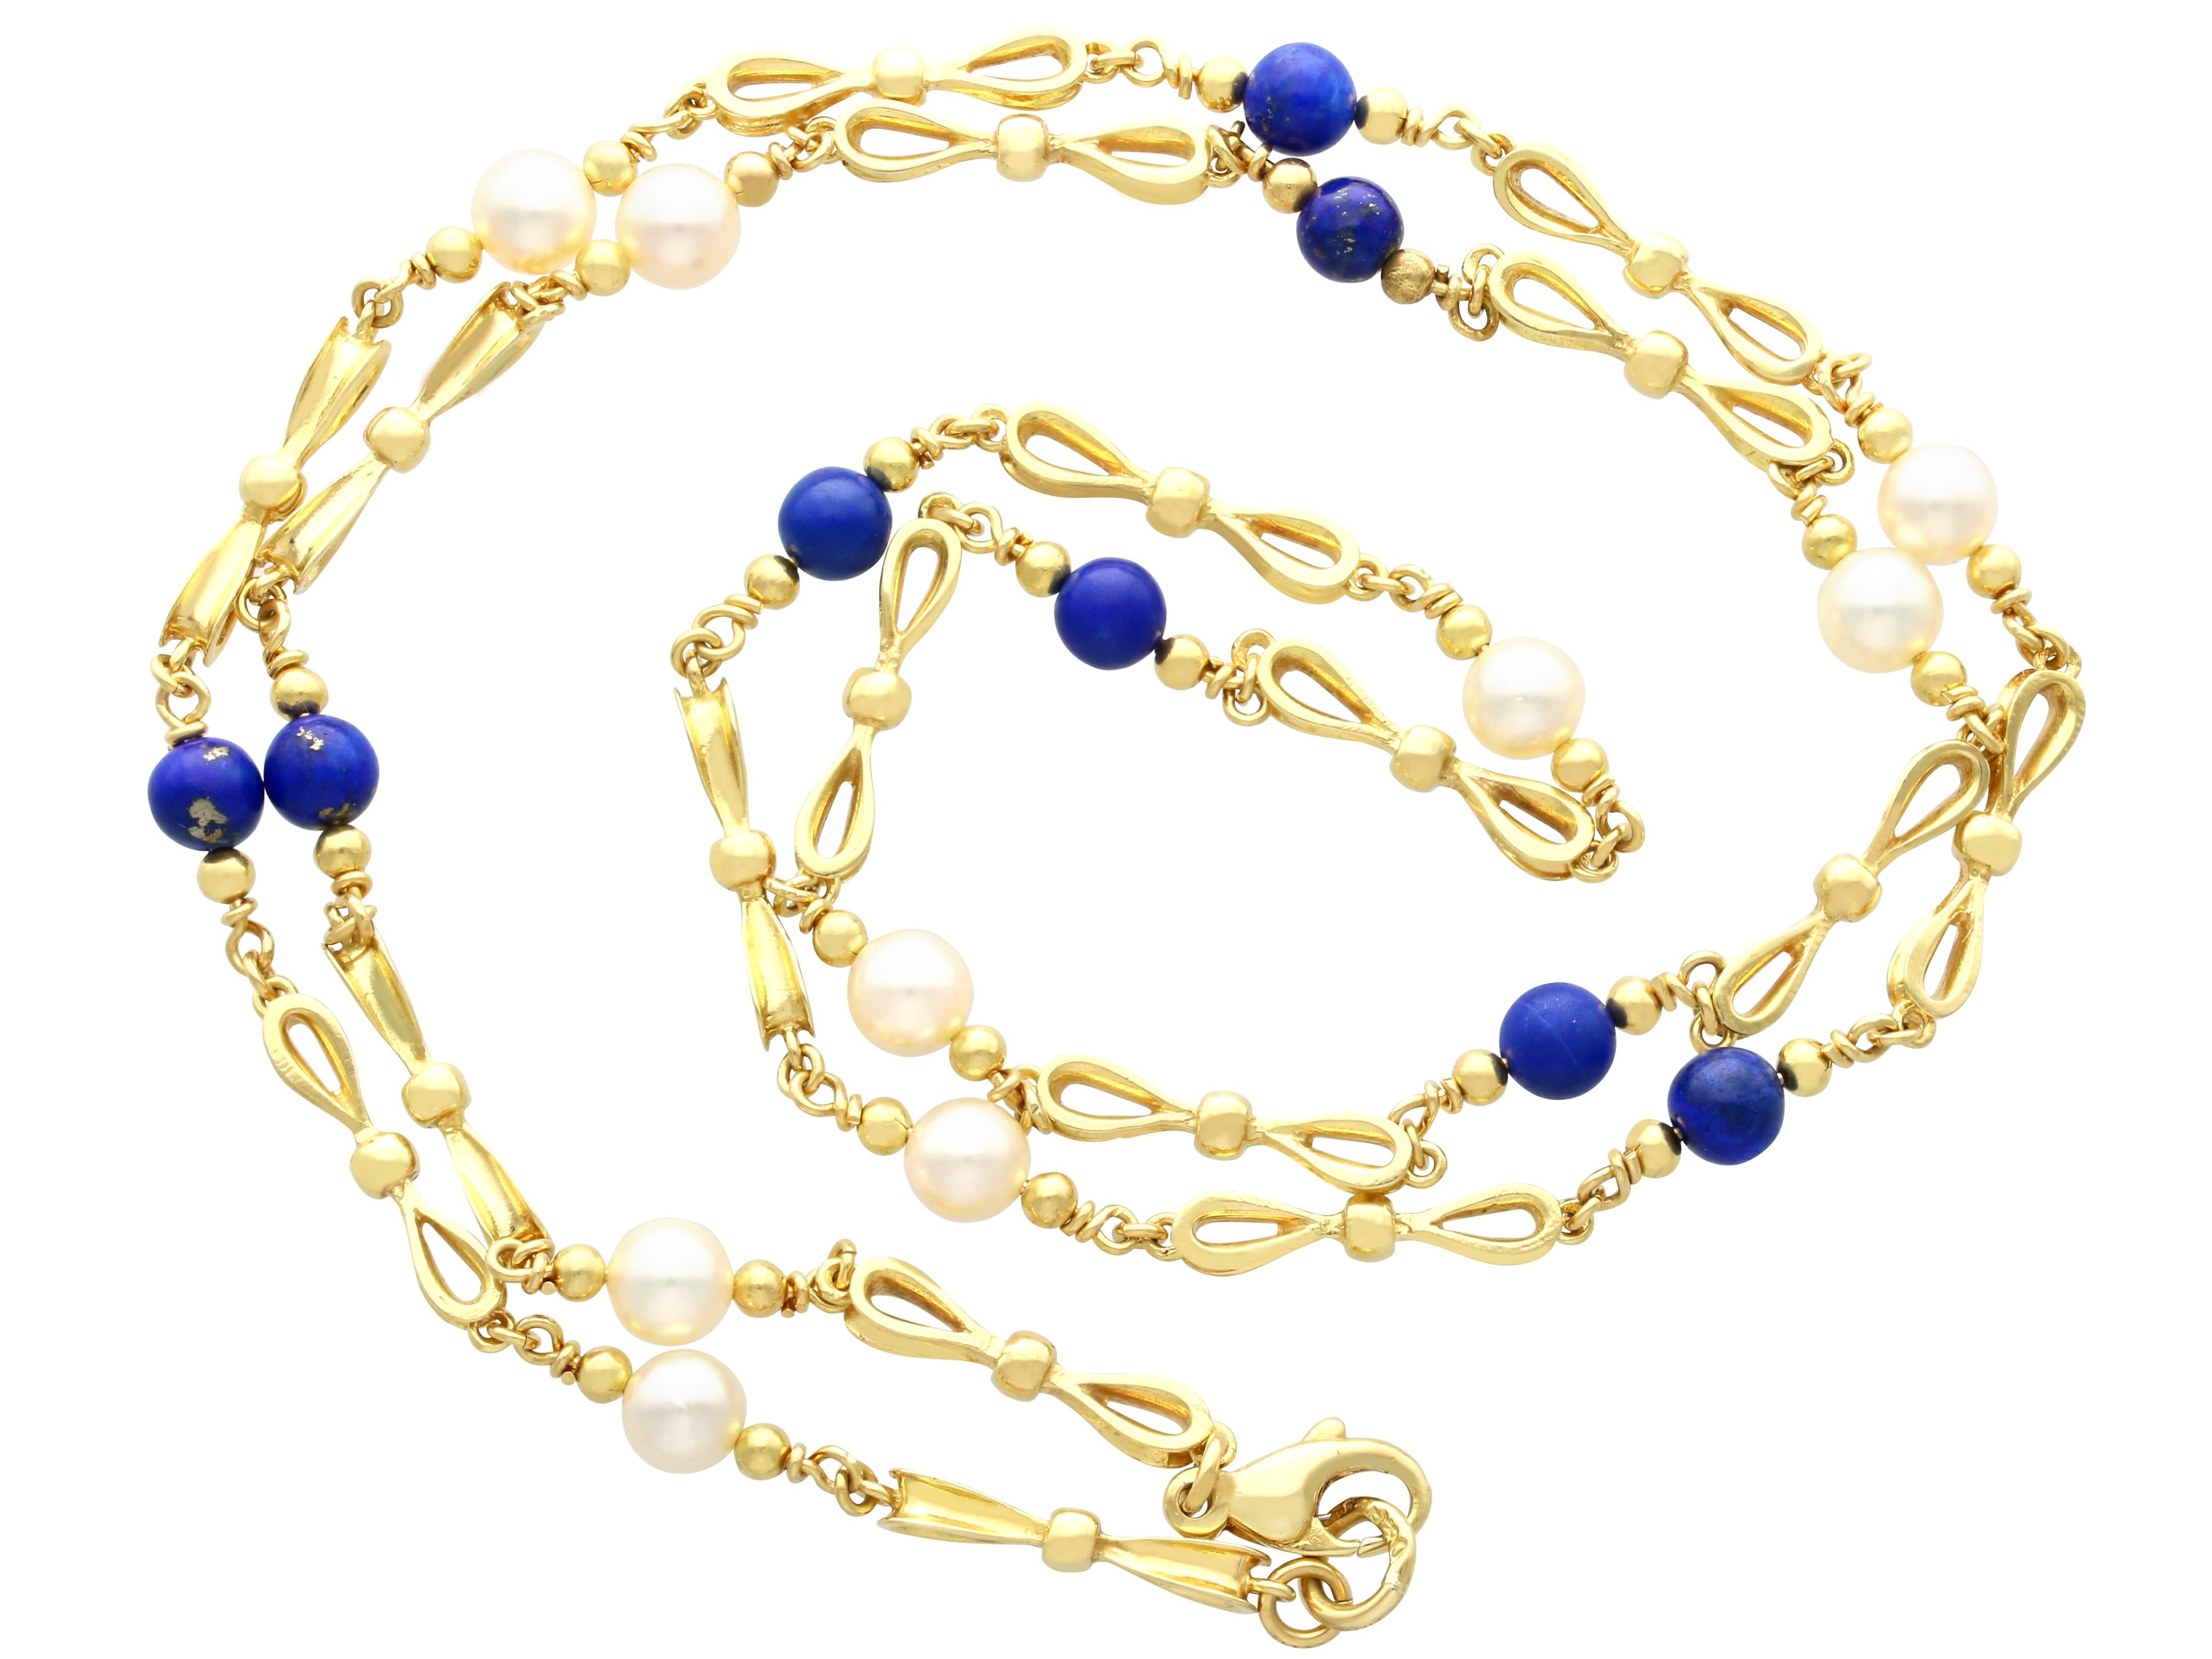 Bead Vintage 7.80 Carat Lapis Lazuli  Pearl Chain Necklace in 18k Yellow Gold For Sale